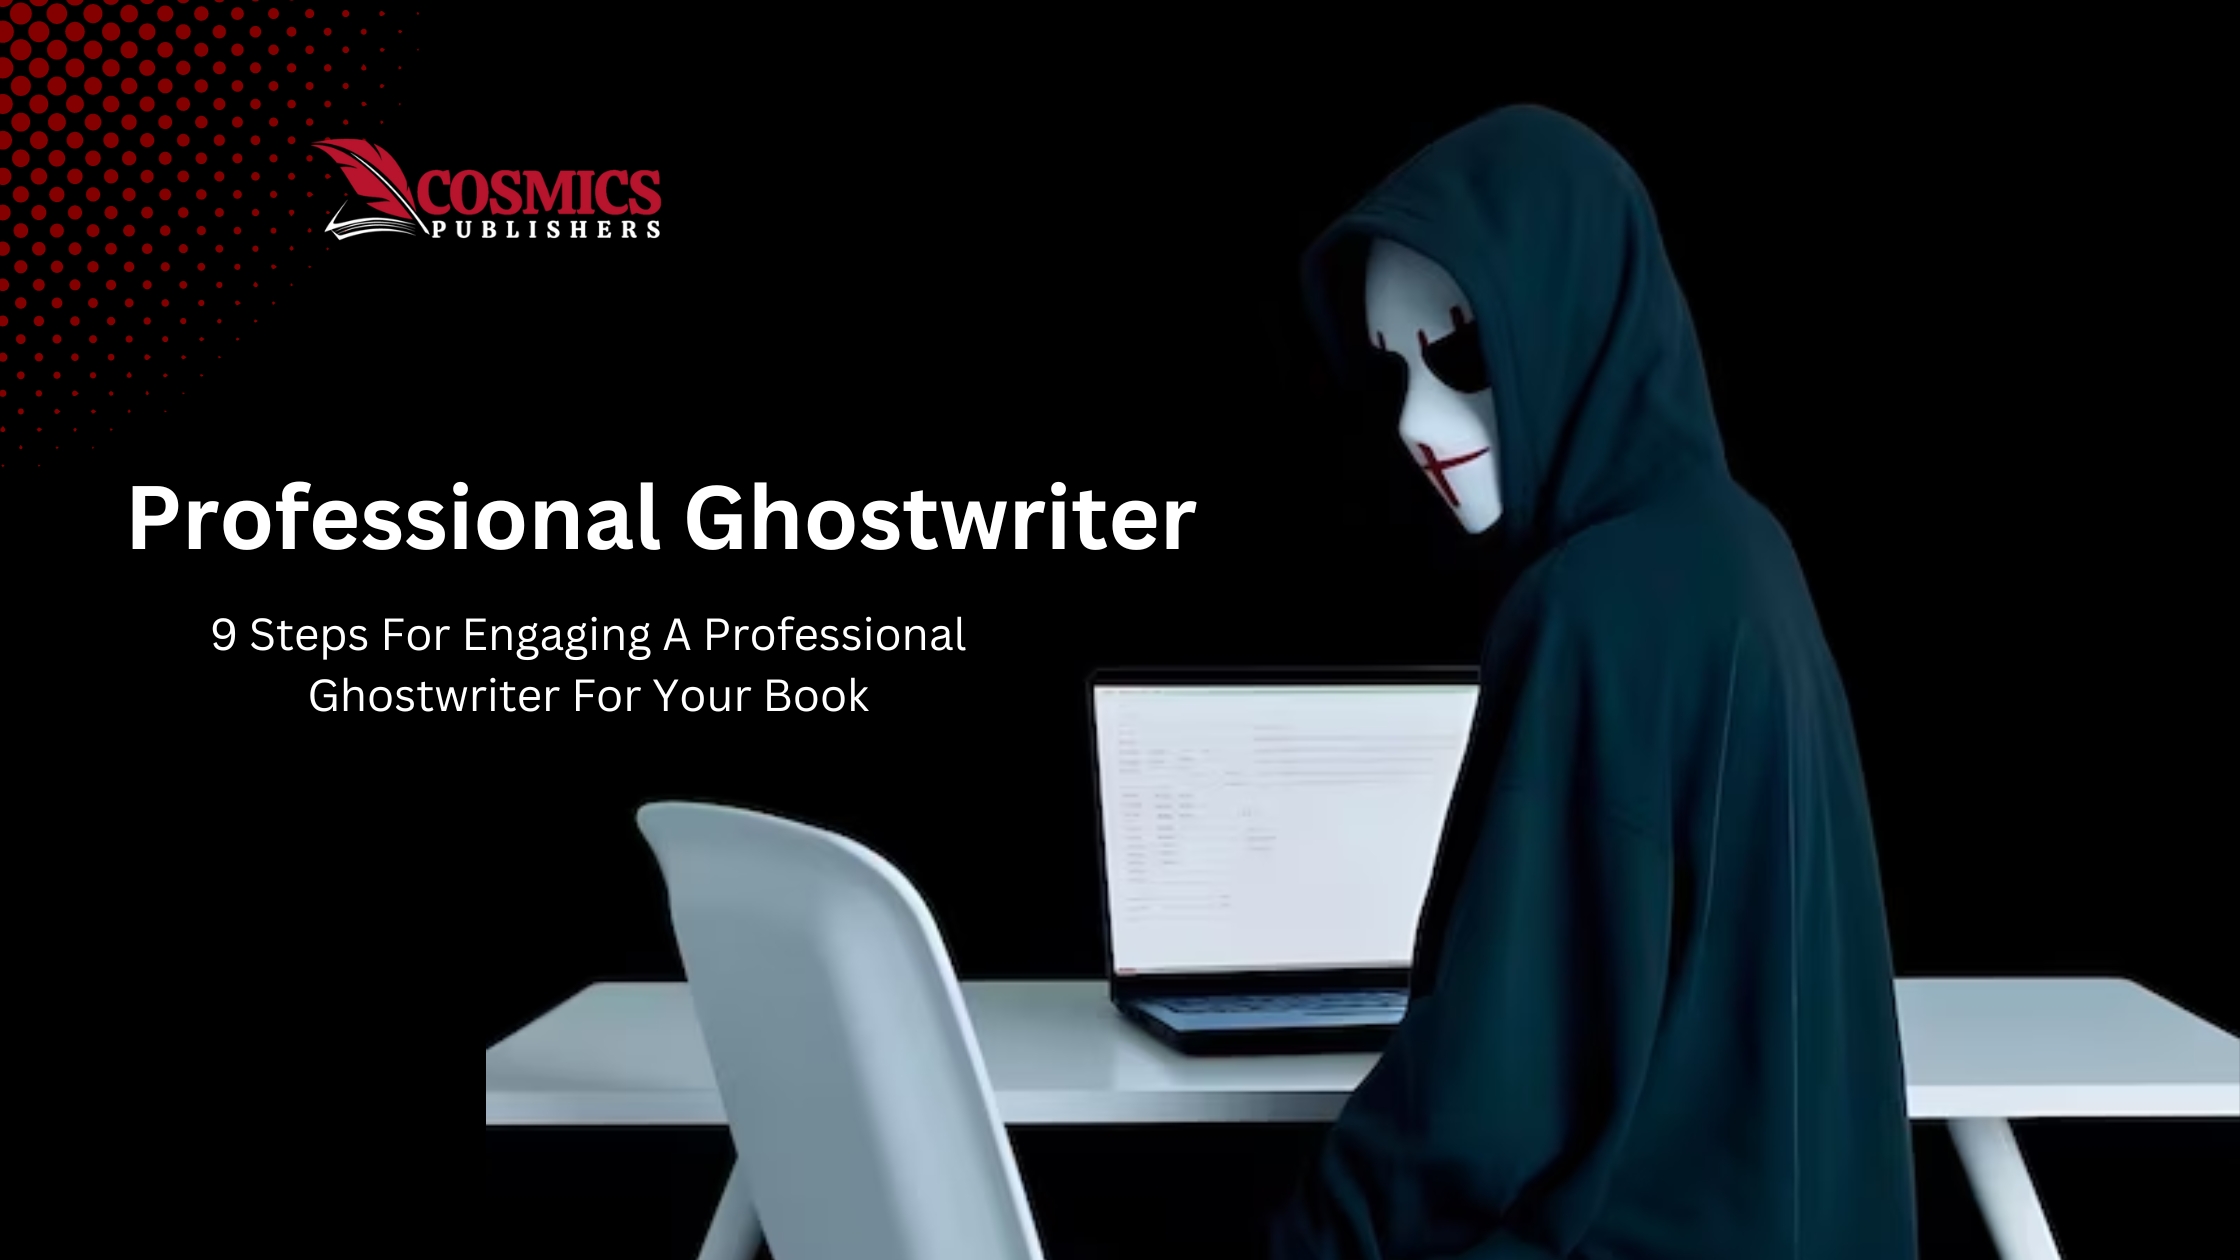 9 Steps For Engaging A Professional Ghostwriter For Your Book